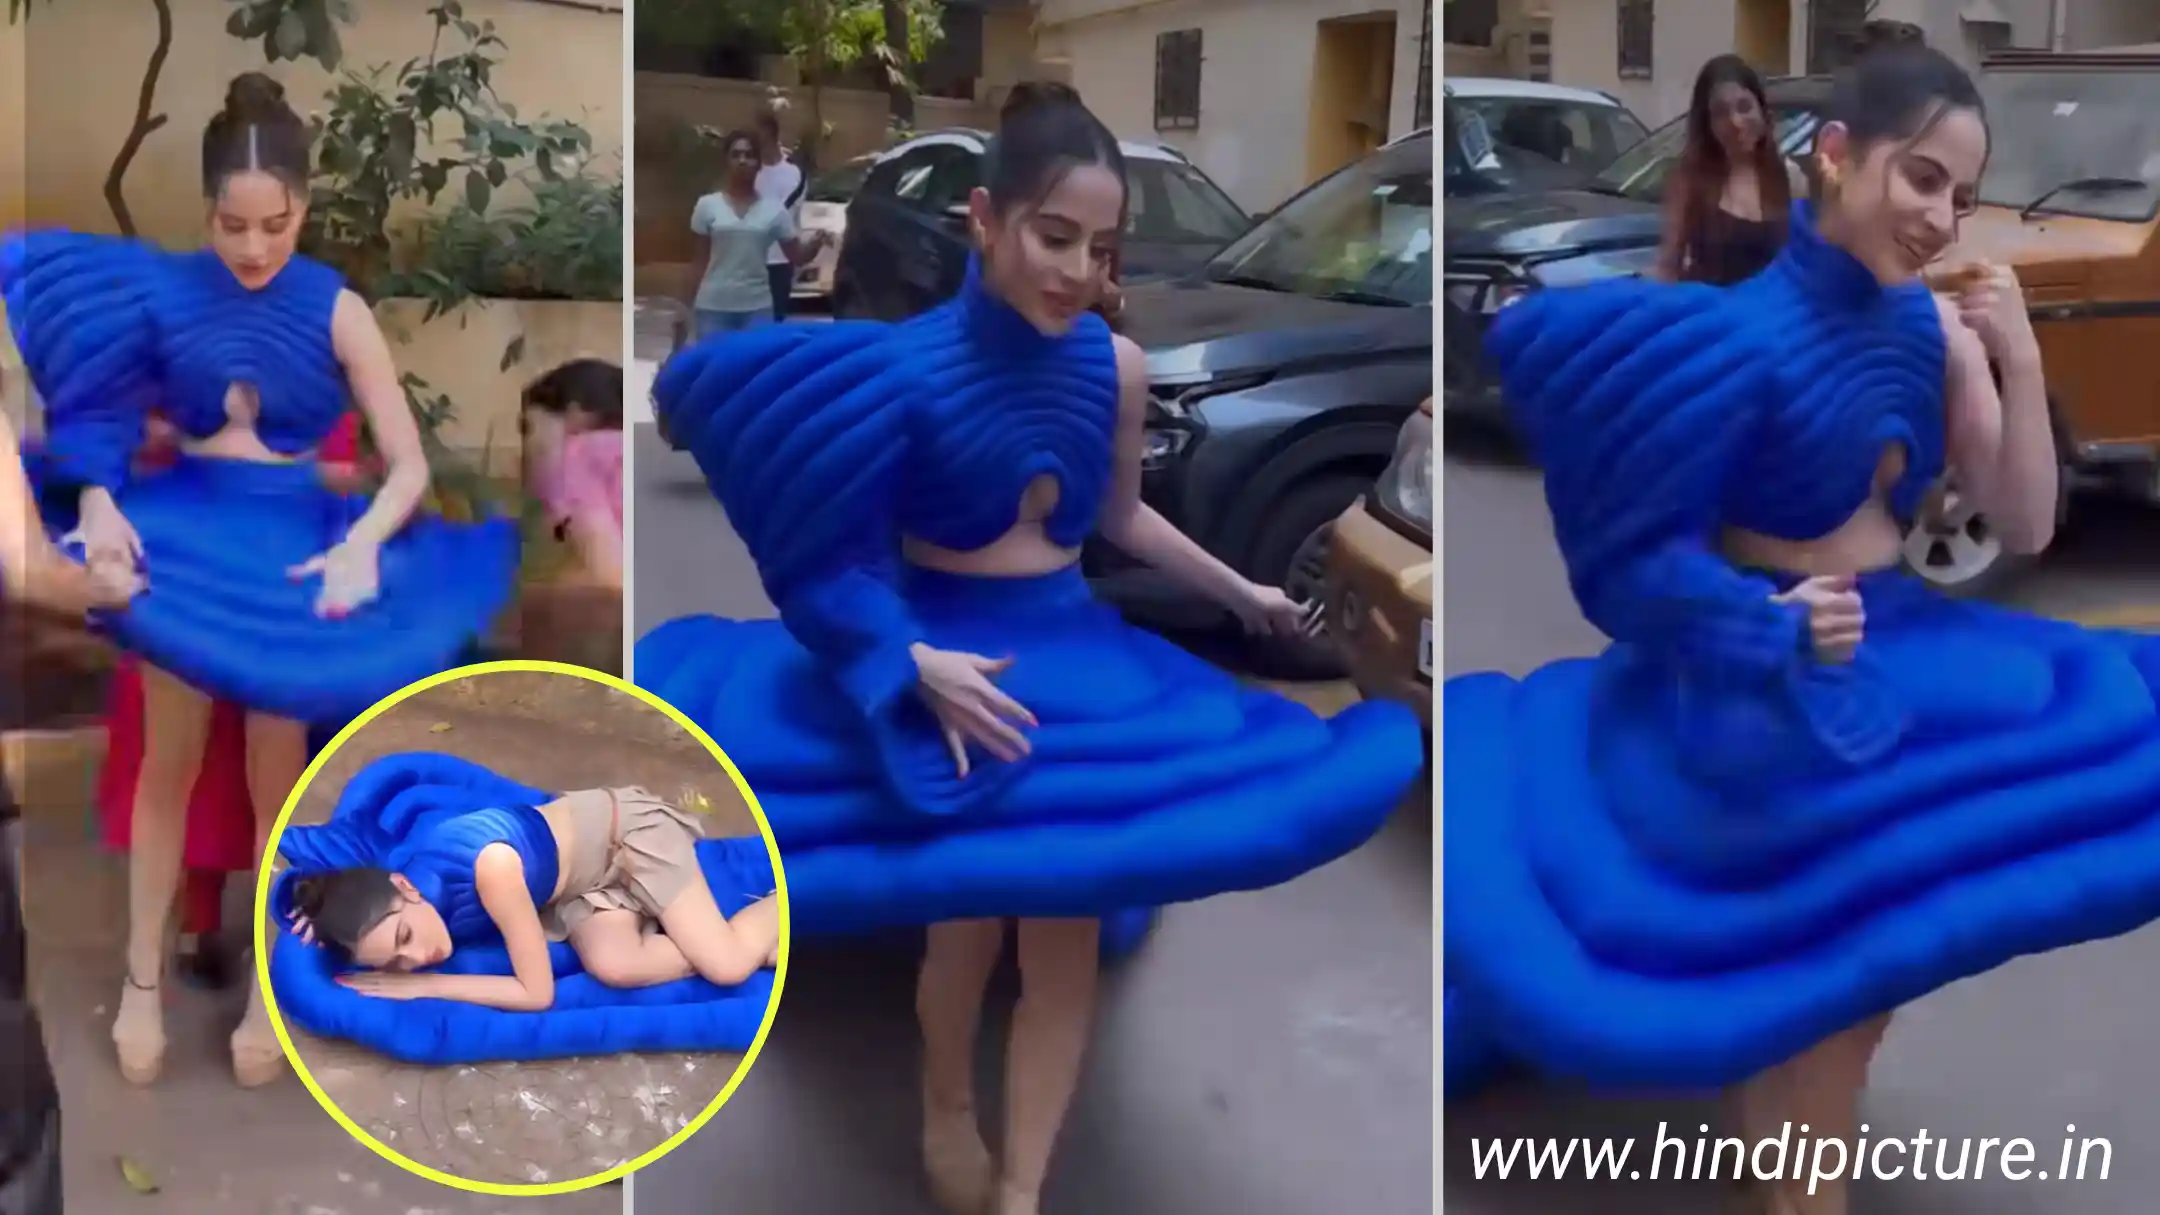 Urfi Javed’s Dress Made from a Sack, Went Viral on Social Media